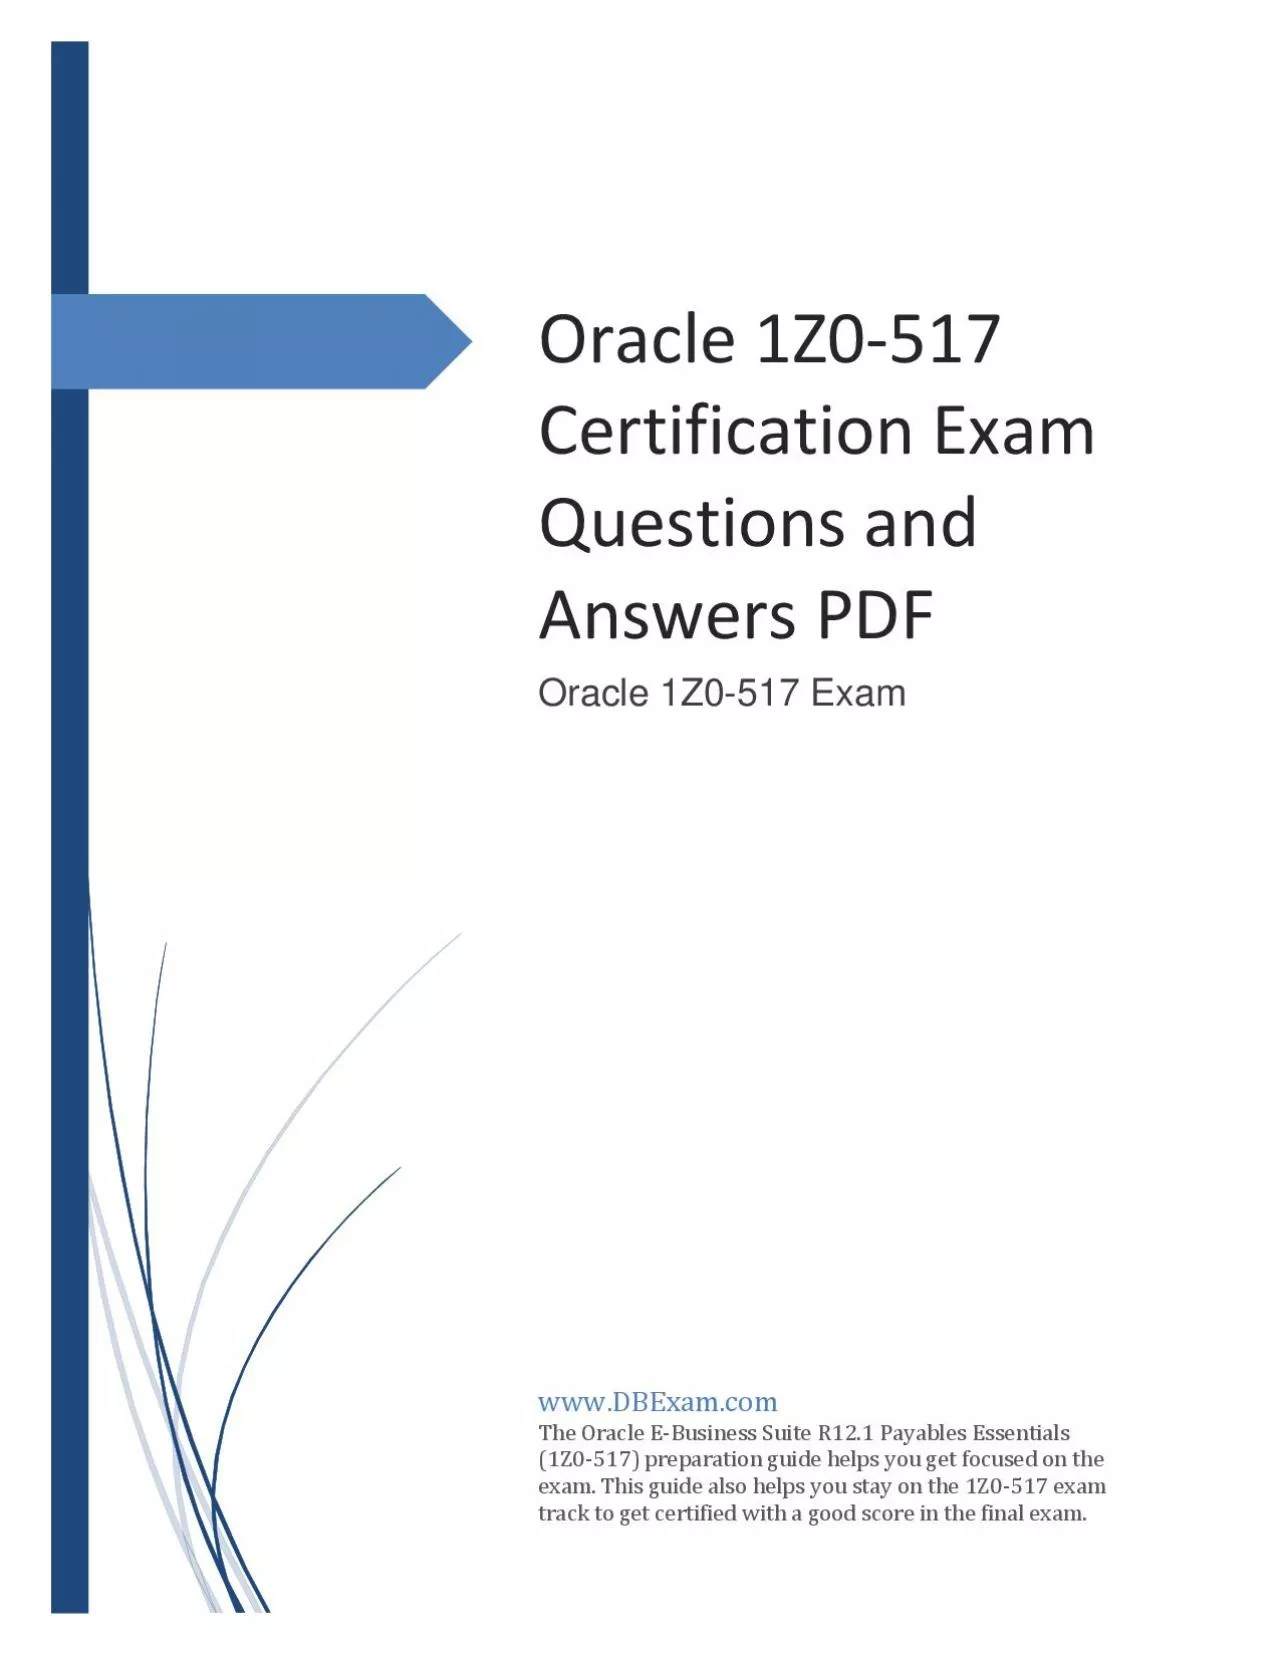 Oracle 1Z0-517 Certification Exam Questions and Answers PDF